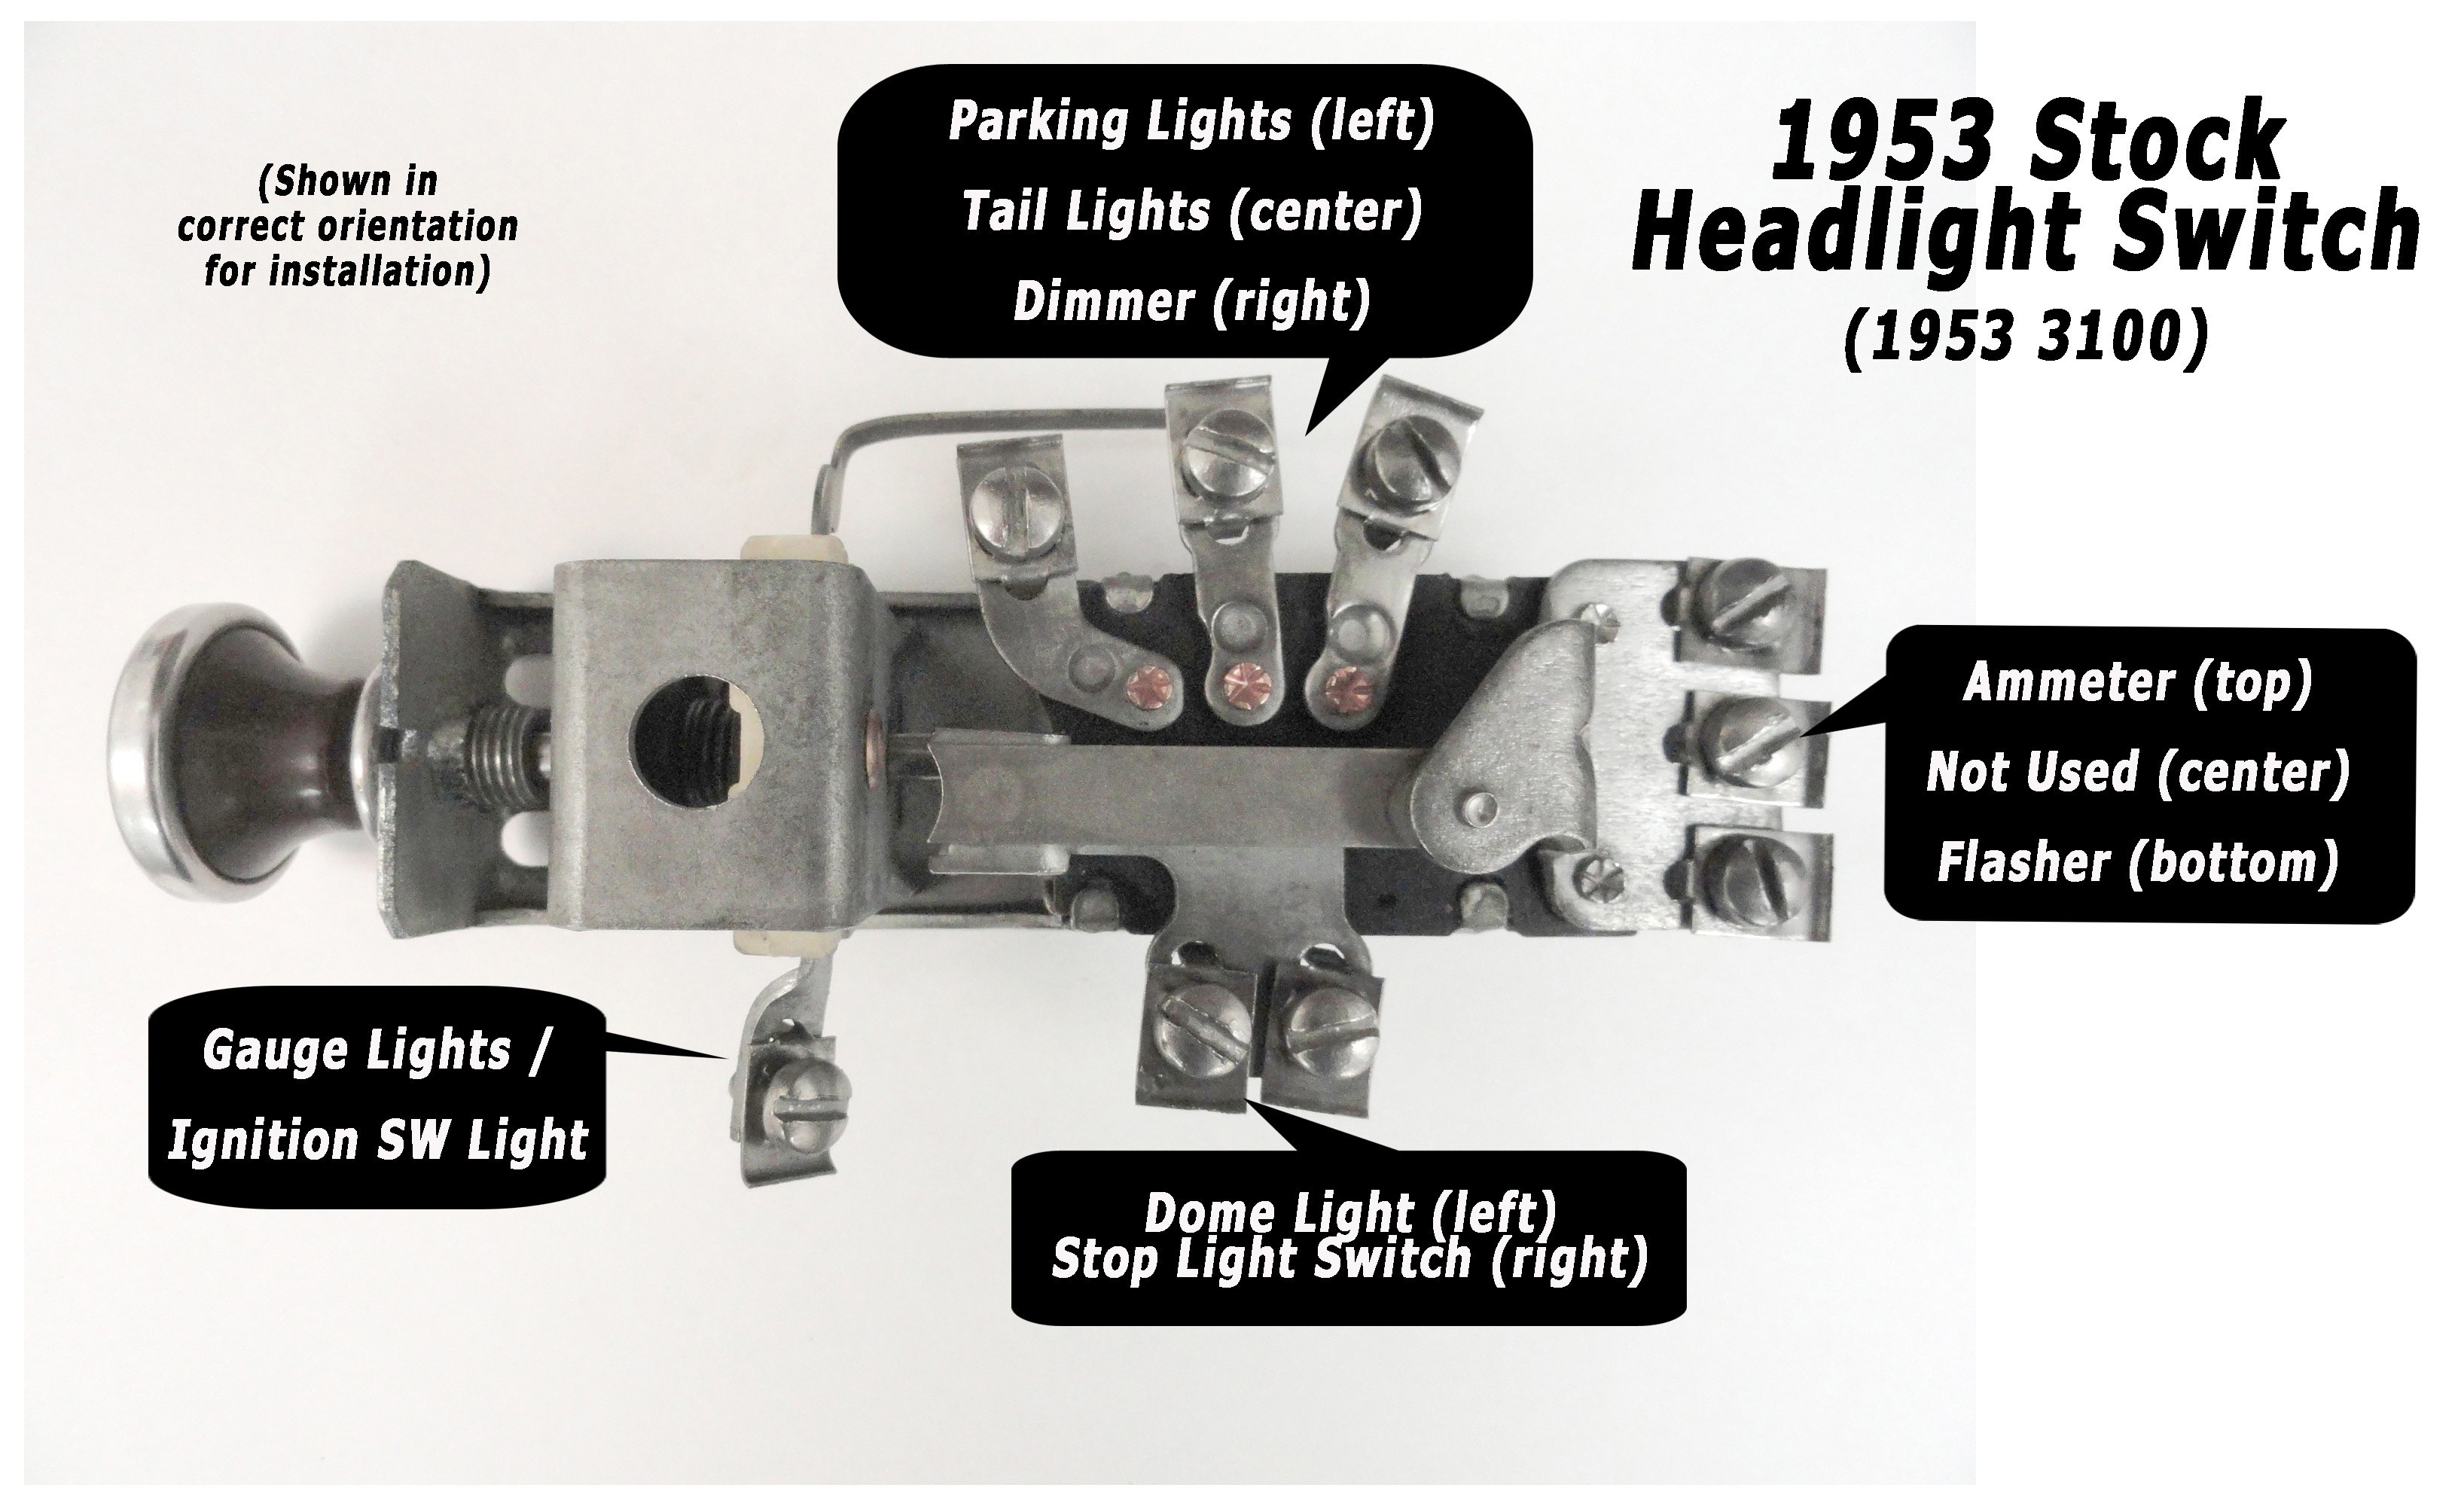 Headlight Switch Wiring Diagram Awesome Beautiful Headlight Switch Wiring Diagram Chevy Truck Diagram